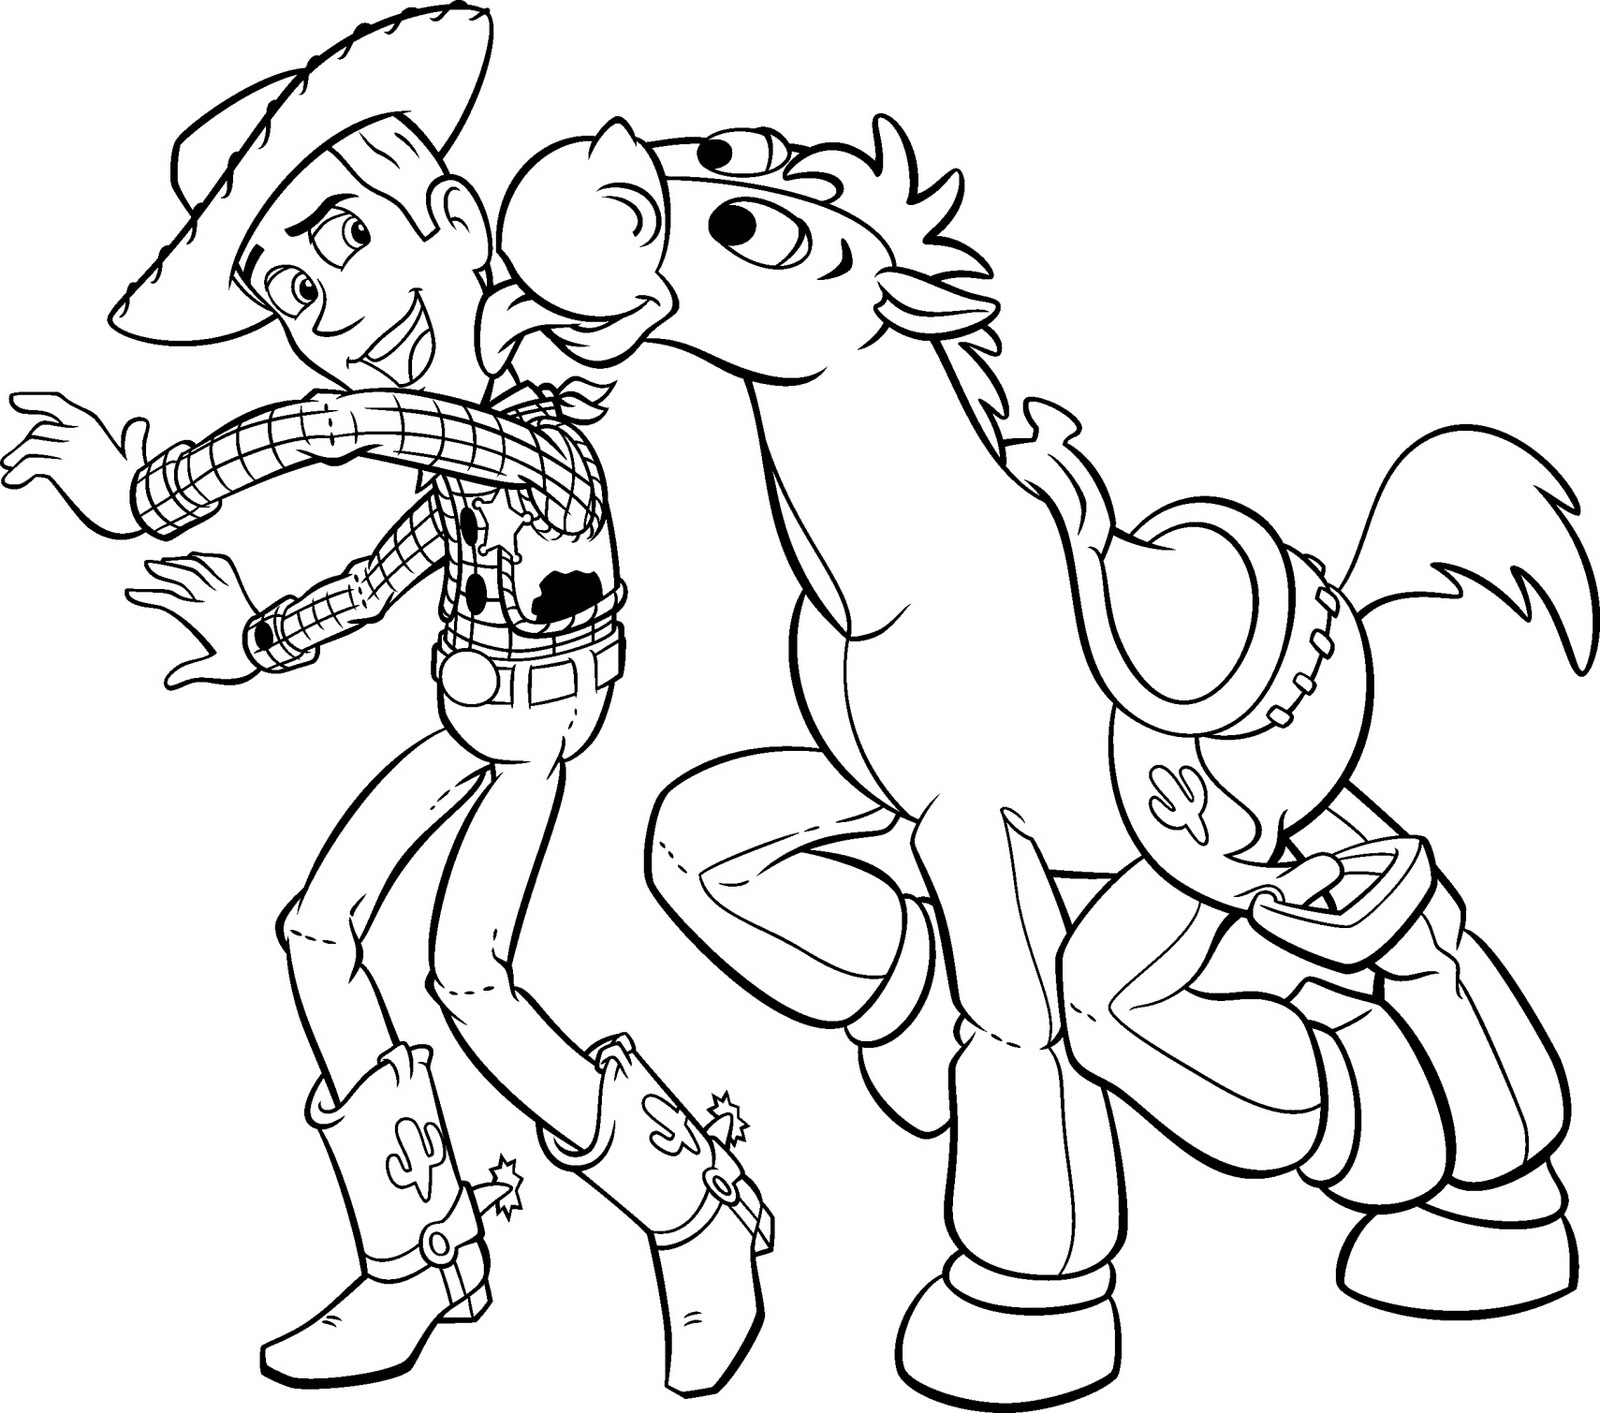 Print and share to your children too Toy Story Woody and Buzz Lightyear Coloring Pages free for you